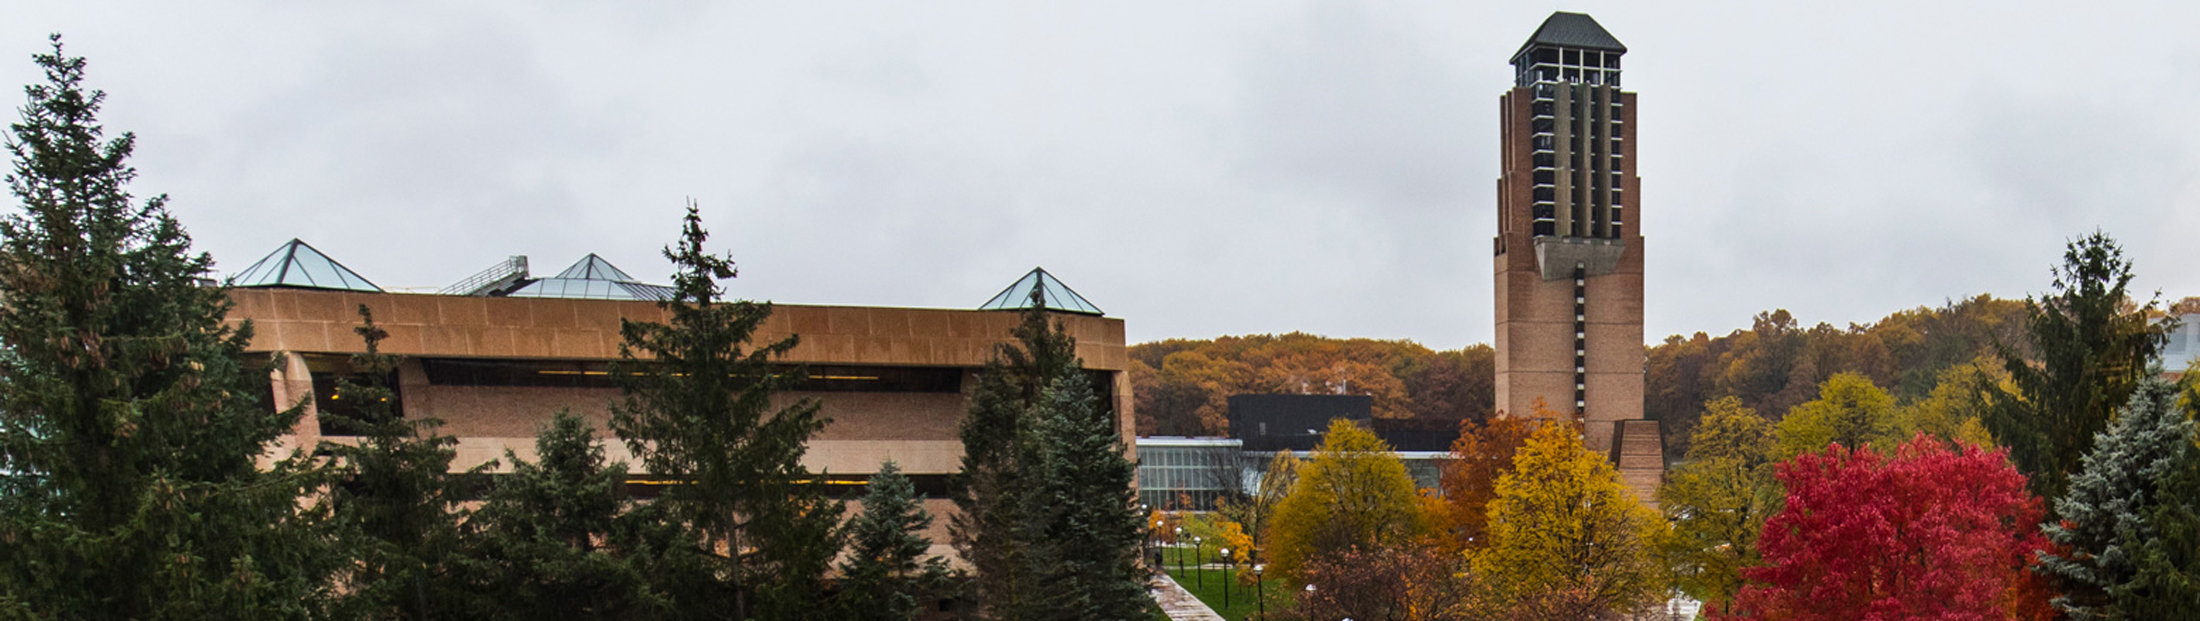 North campus’ Grove and Duderstadt during fall 2018.